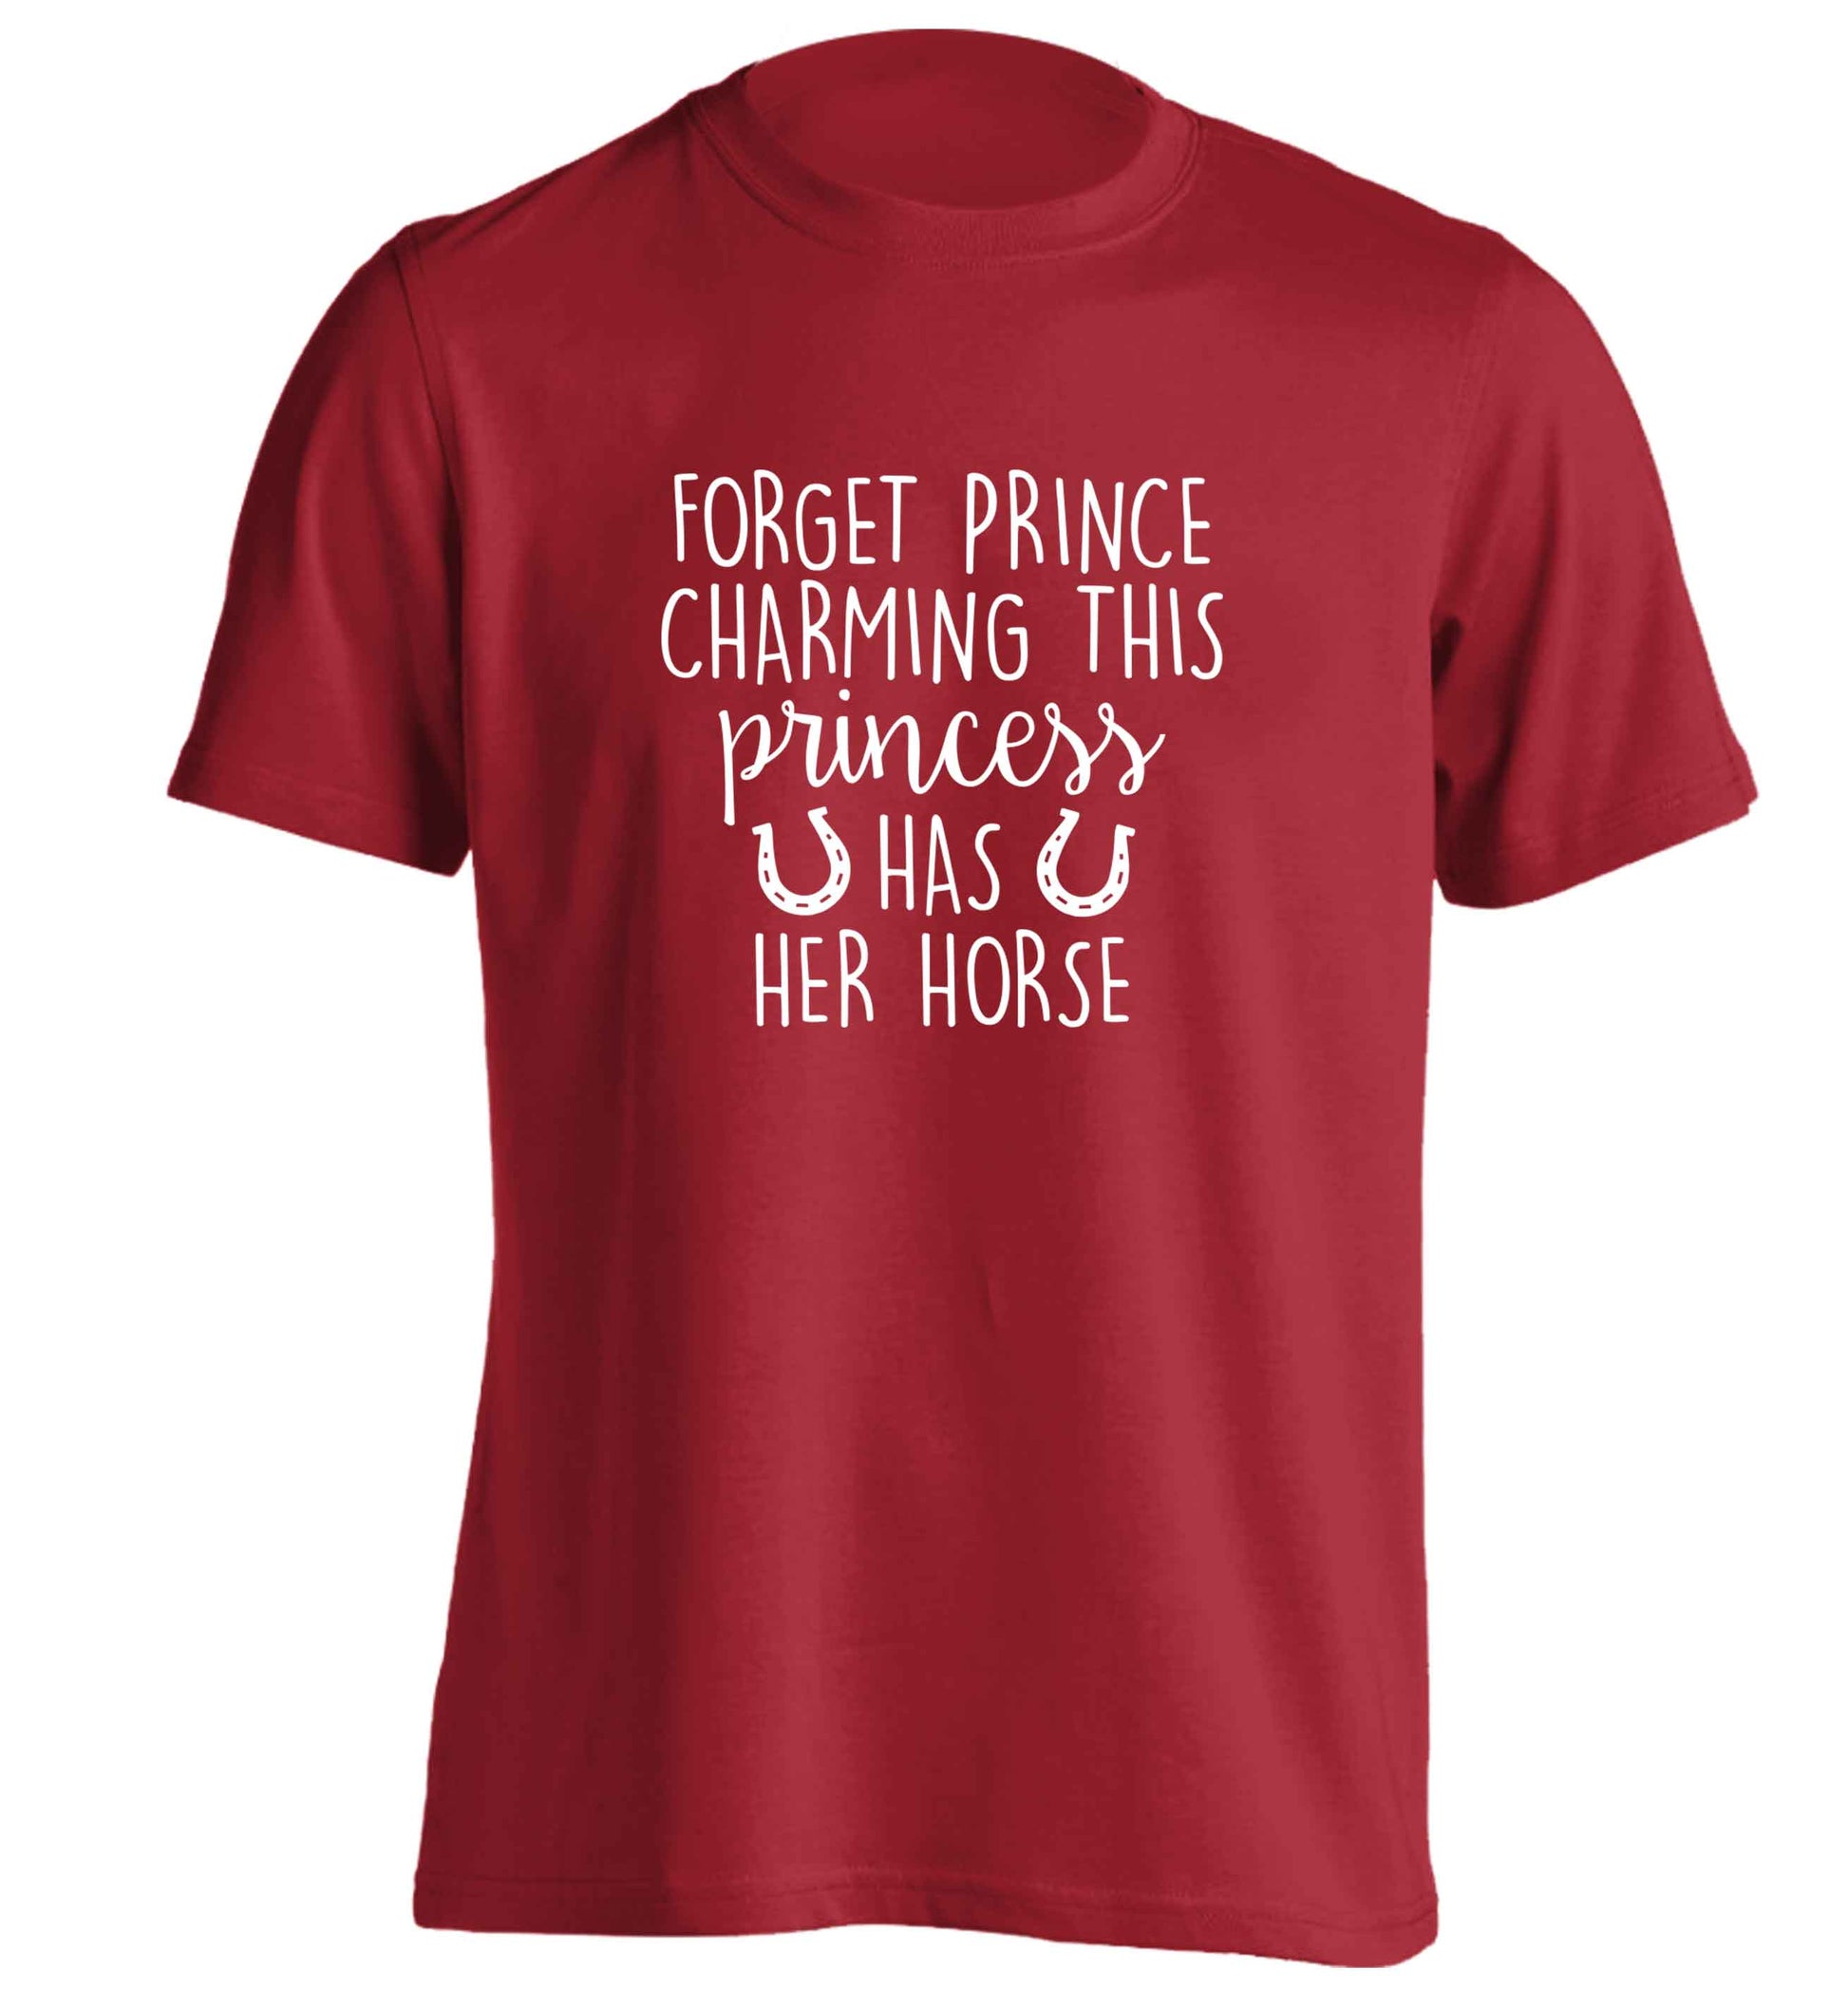 Forget prince charming this princess has her horse adults unisex red Tshirt 2XL